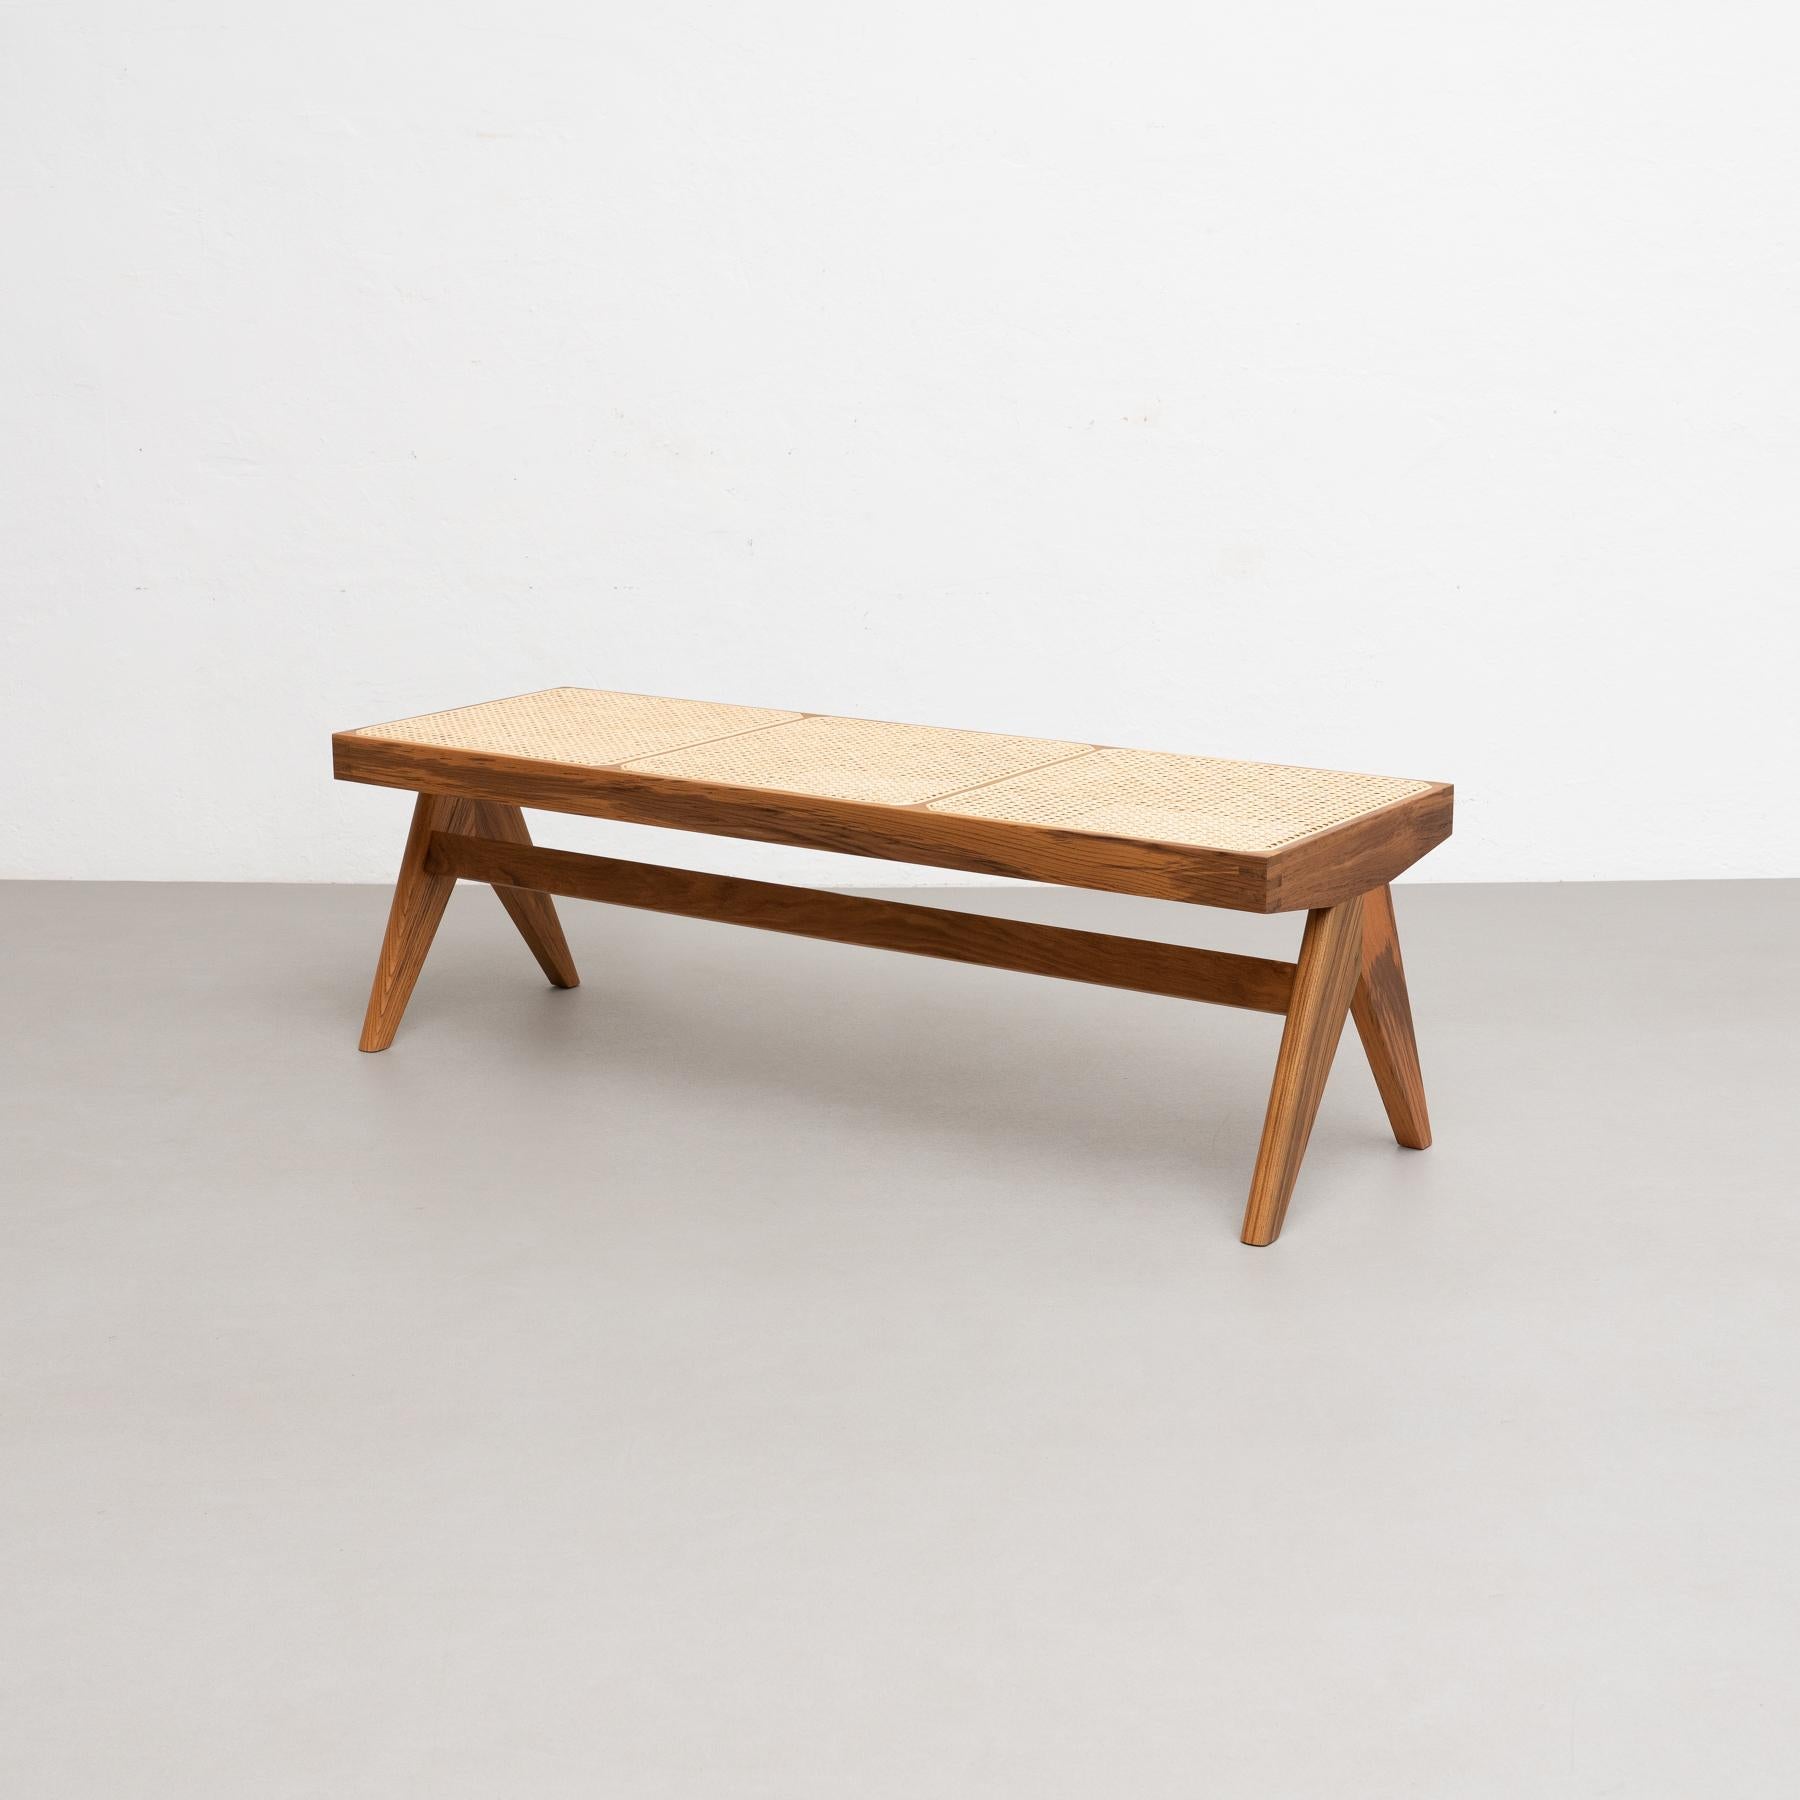 Bench designed by Pierre Jeanneret circa 1955, relaunched in 2020.
Manufactured by Cassina in Italy.

Cassina continues its study of the furniture of the city of Chandigarh and adds the Civil Bench to the Hommage à Pierre Jeanneret Collection; a